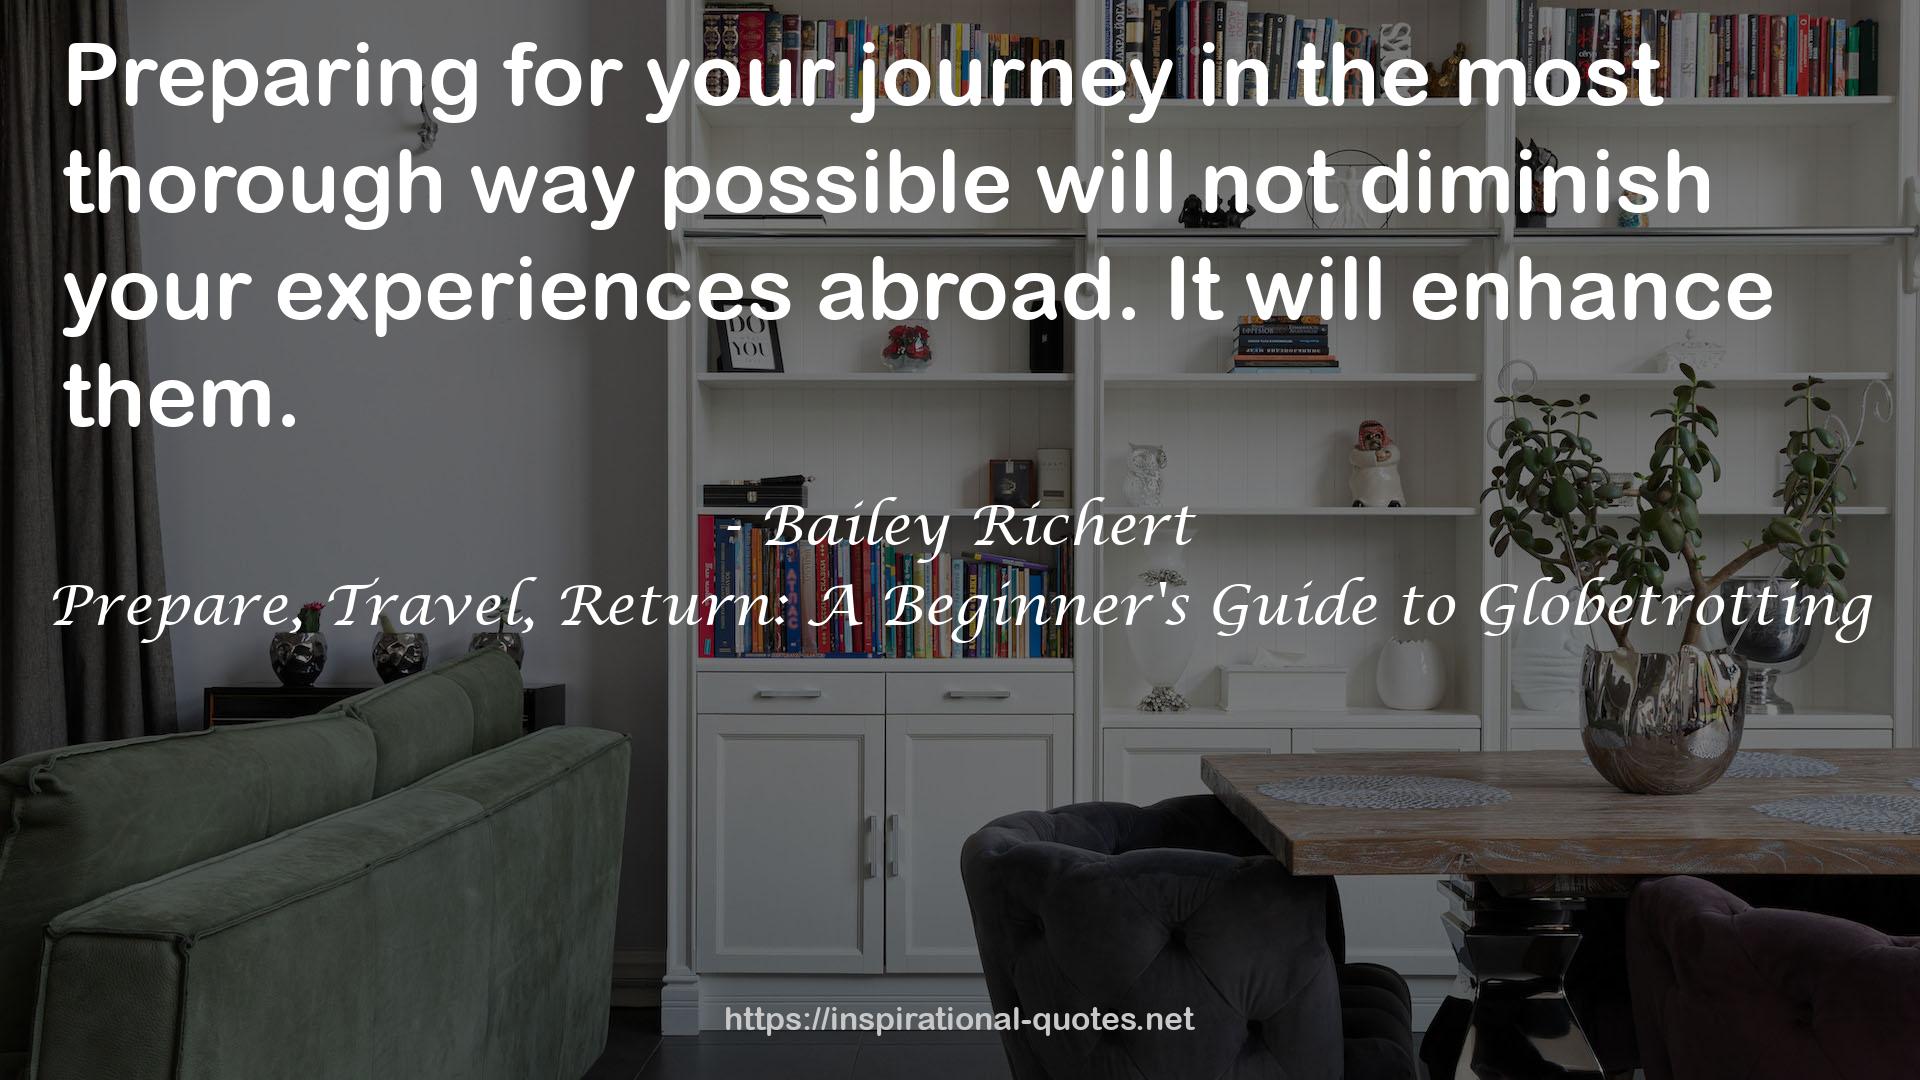 Prepare, Travel, Return: A Beginner's Guide to Globetrotting QUOTES